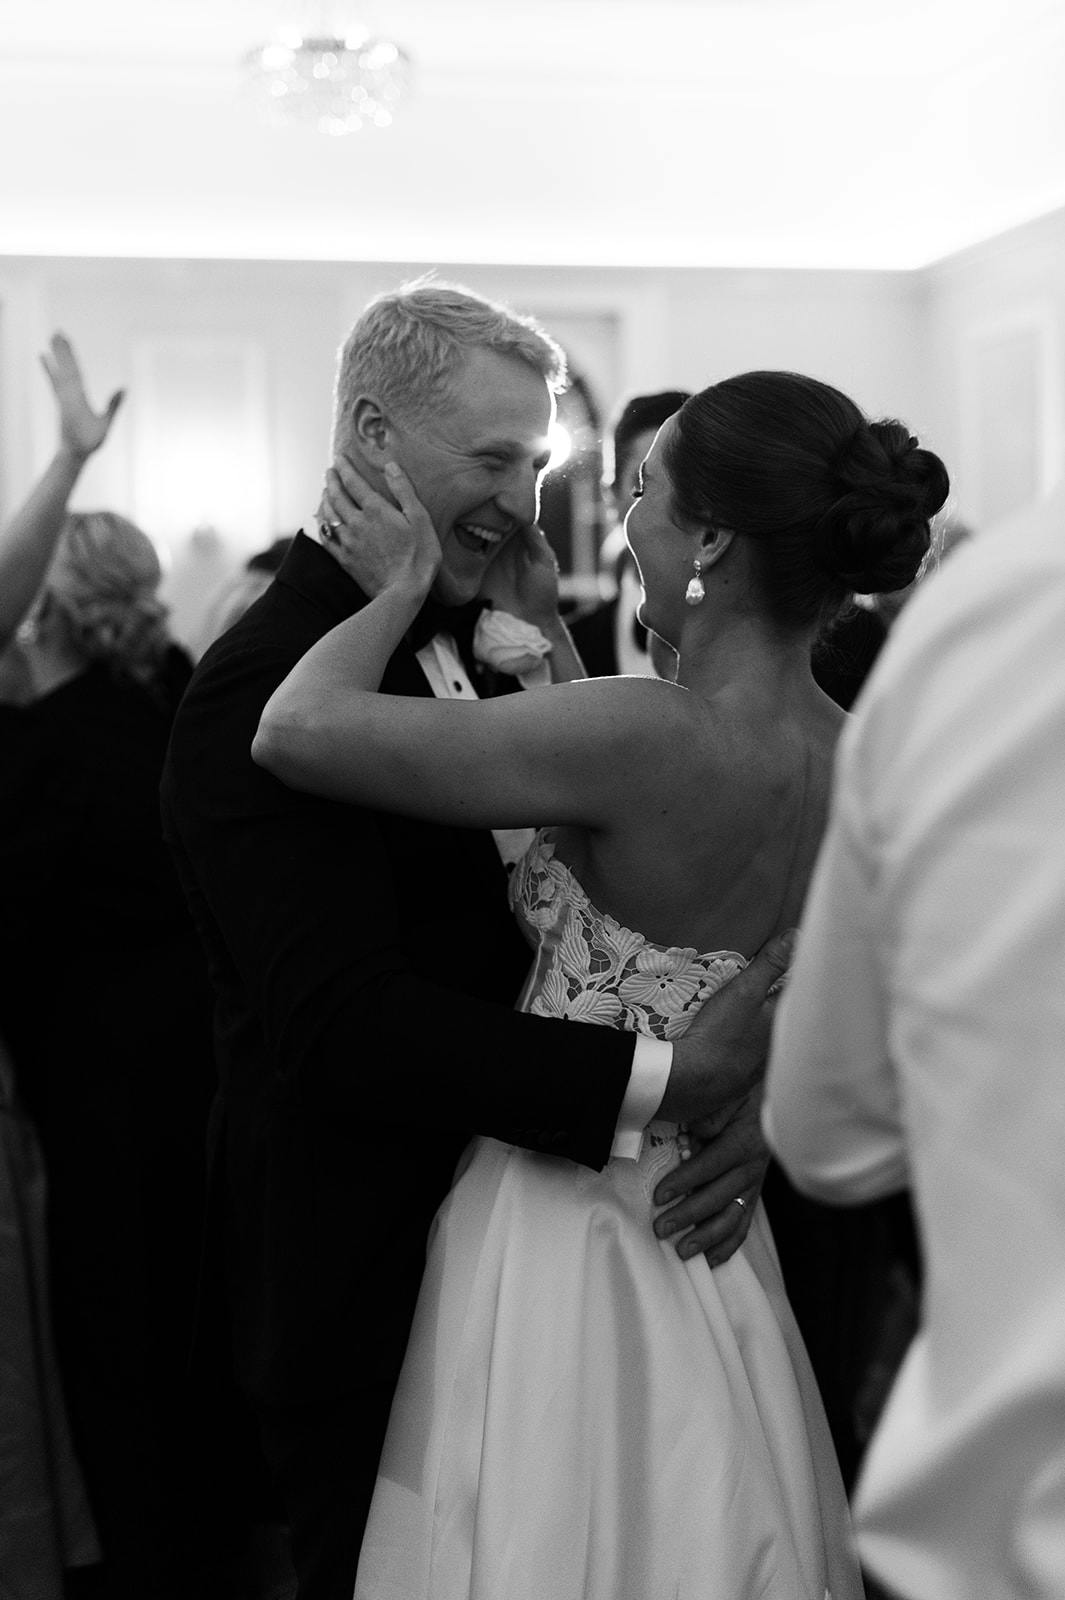 A bride and groom share a joyous moment, laughing and holding each other closely on a dance floor. The bride, wearing an elegant strapless dress, and the groom, in a suit, are surrounded by other guests. The scene is captured in black and white.